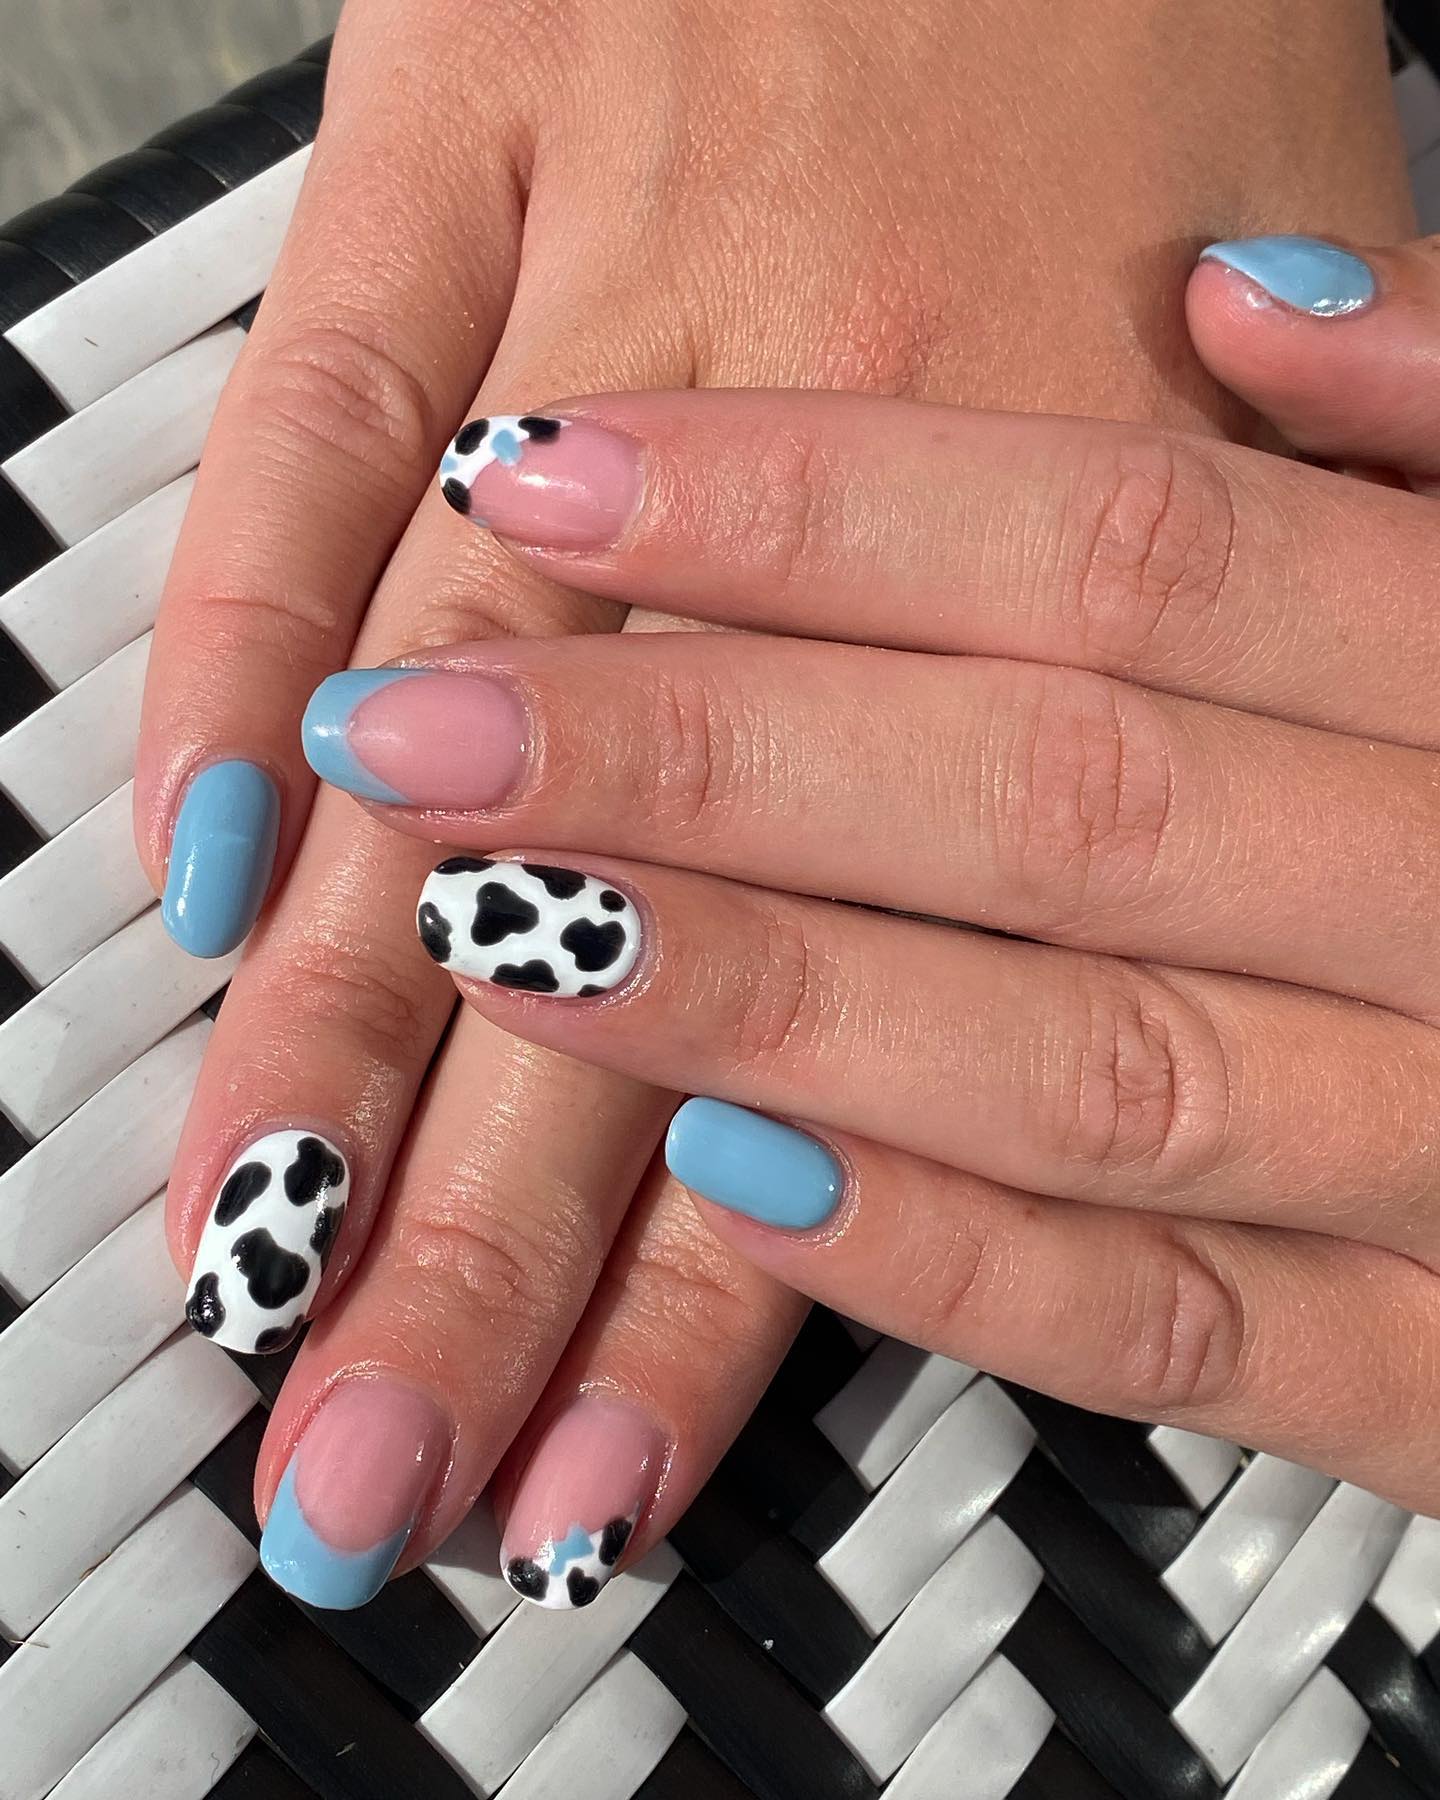 This is absolutely amazing! the color is gorgeous, and the cow prints are really unique. Although the nail design above may look like something subtle and complicated, all details create a perfect look.